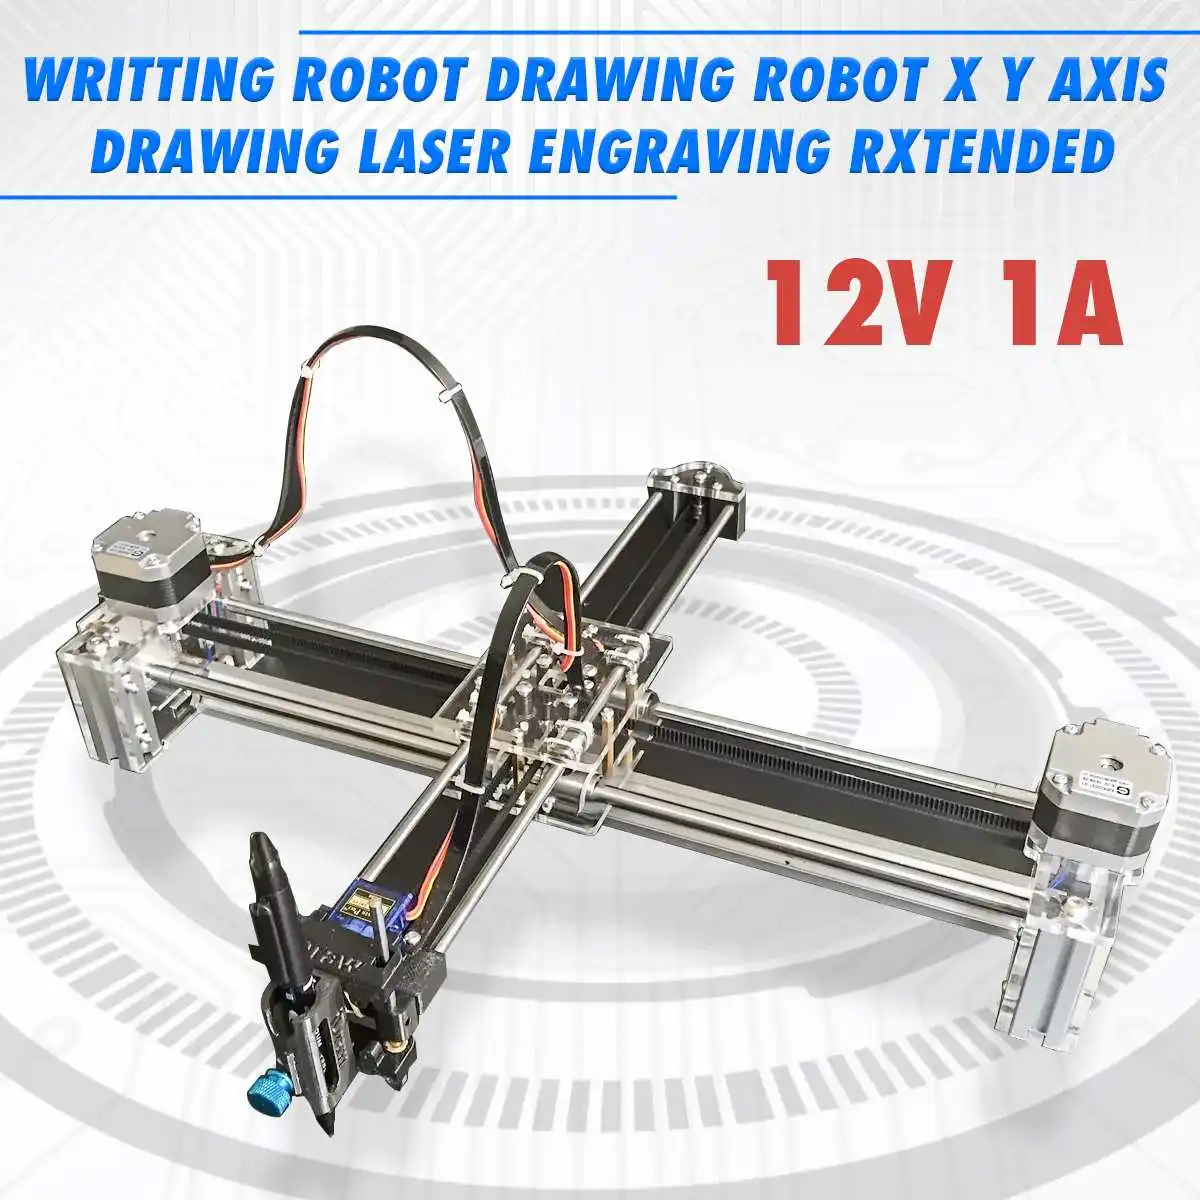 

12V 1A 2 Axis Writing Drawing Robot X Y Axis Drawing Laser Engraving Extended Writing Robot Printer Machine